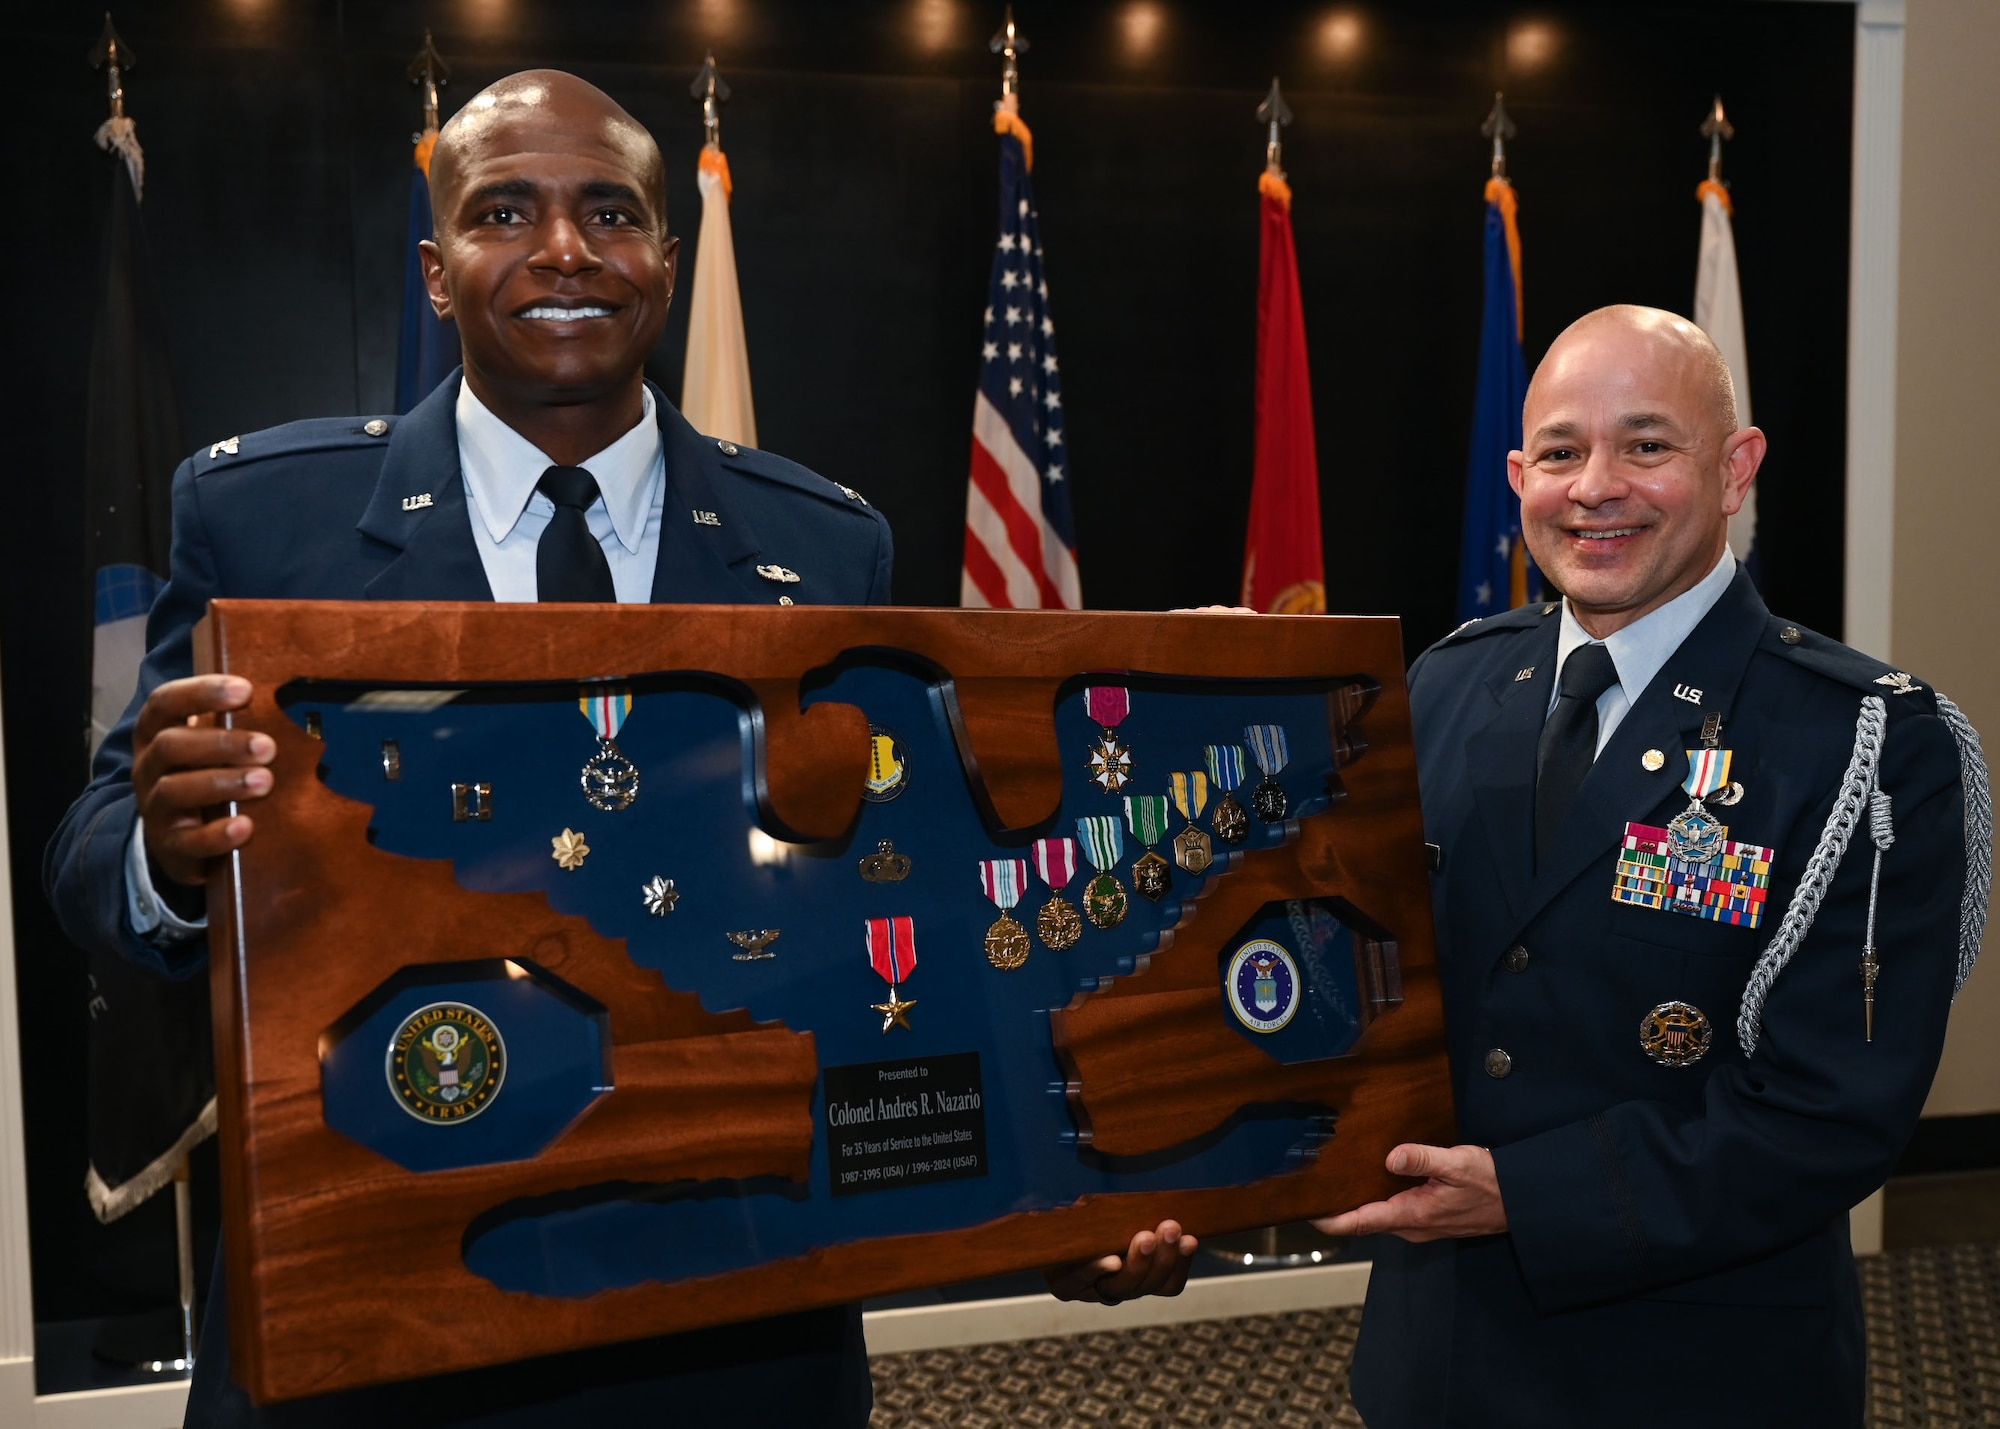 U.S. Air Force Col. James Finlayson, Air Force Technical Applications Center commander, presents a shadowbox to Col. Andres Nazario, United States Air Attache to Mexico, during Nazario’s retirement ceremony at the Powell Event Center, Goodfellow Air Force Base, Texas, April 2, 2024. Finlayson served as deputy commander with Nazario during his time as wing commander at Goodfellow. (U.S. Air Force photo by Airman 1st Class Evelyn D’Errico)